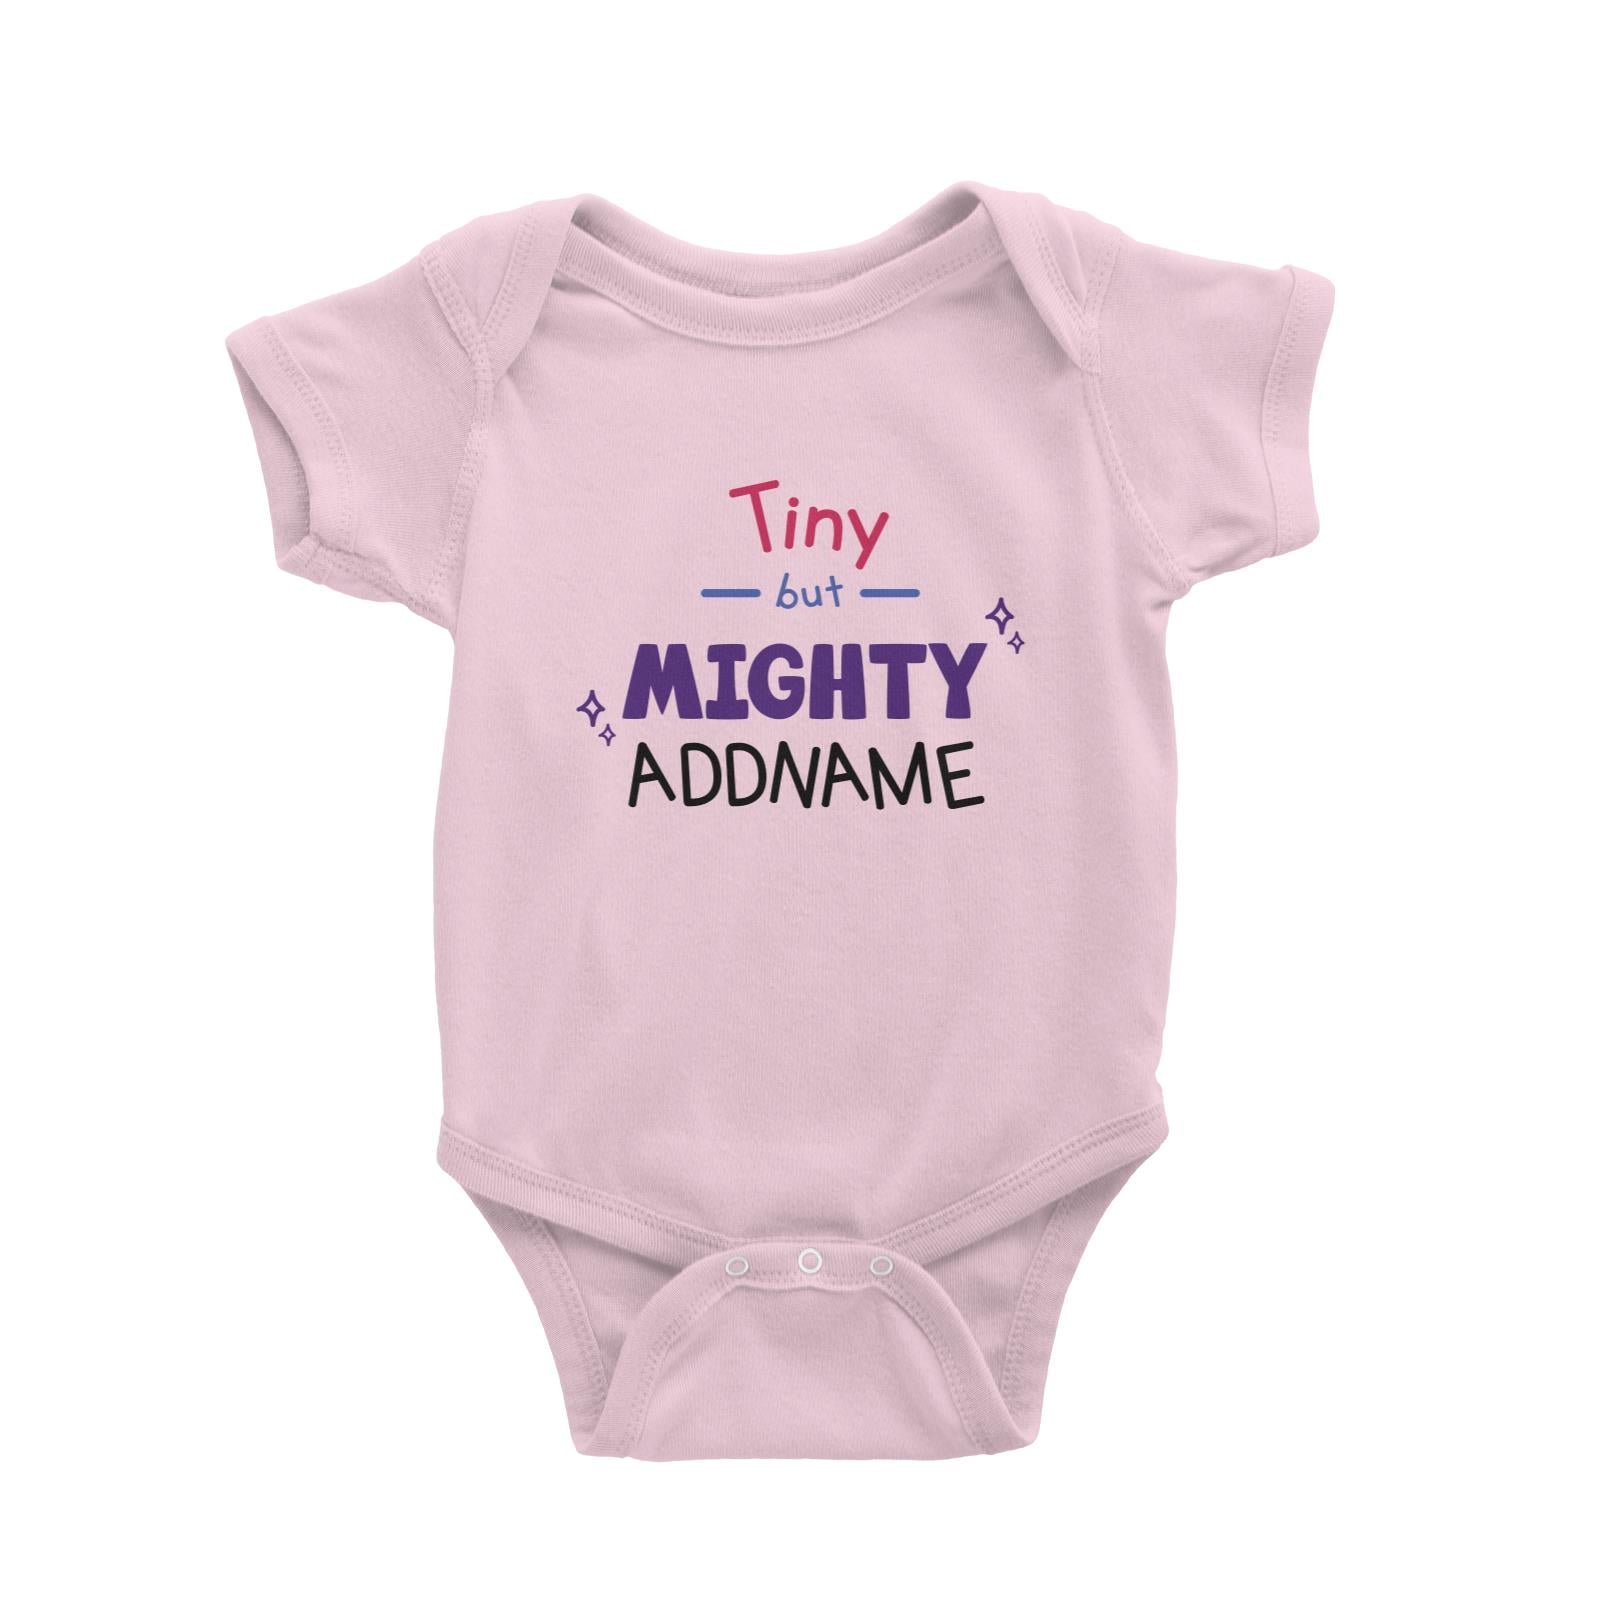 Children's Day Gift Series Tiny But Mighty Addname Baby Romper